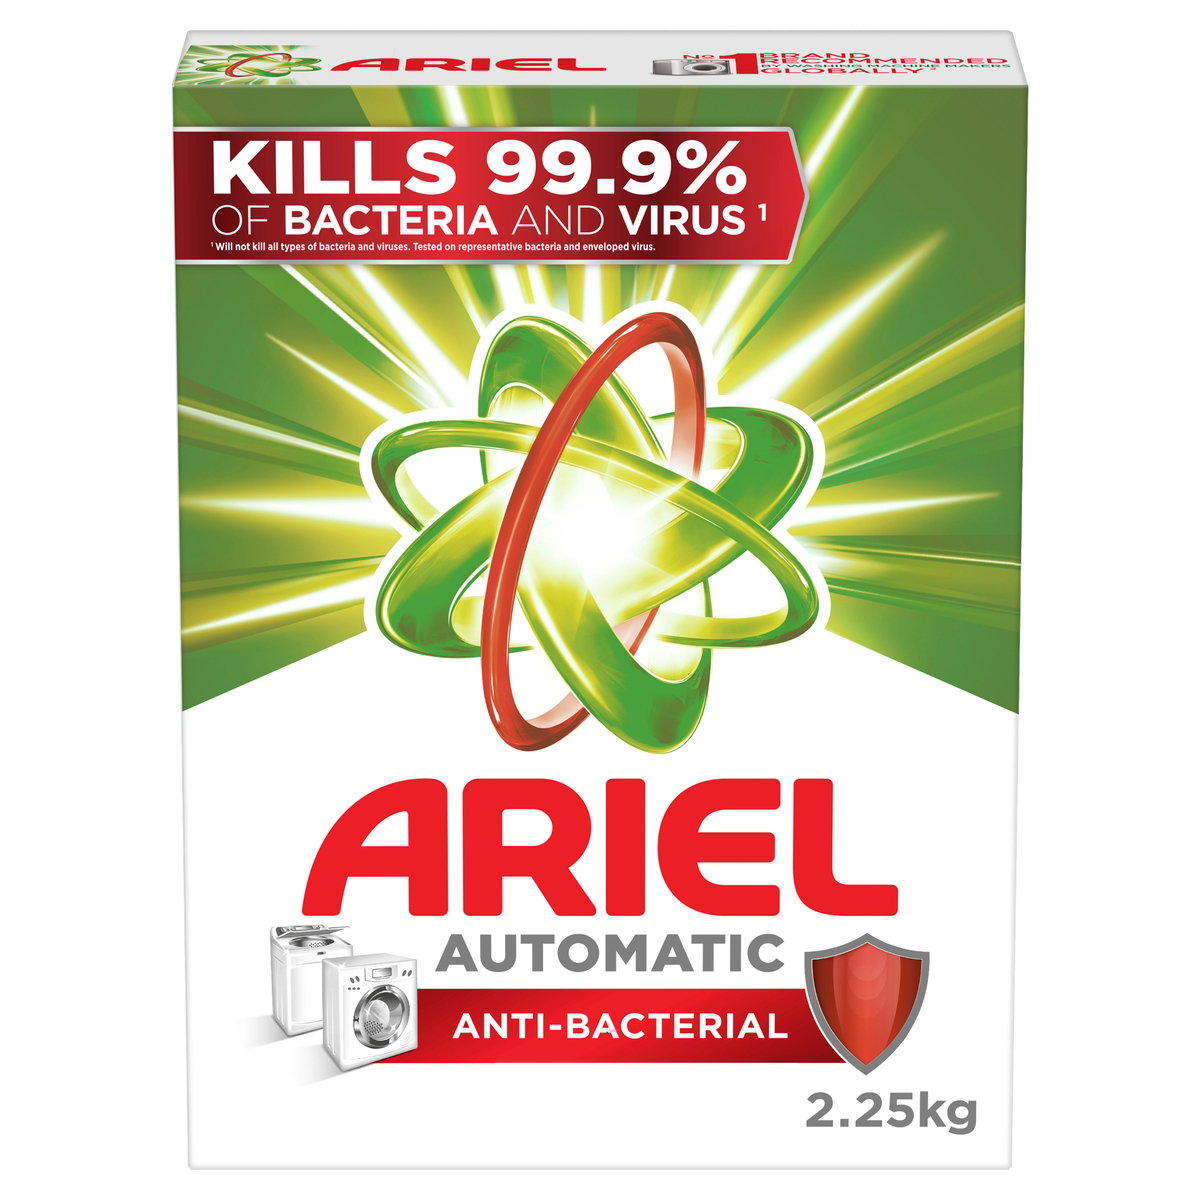 Buy Ariel Automatic Antibacterial Laundry Detergent Original Scent 2.25 kg Online at Best Price | Front load washing powders | Lulu Kuwait in Kuwait